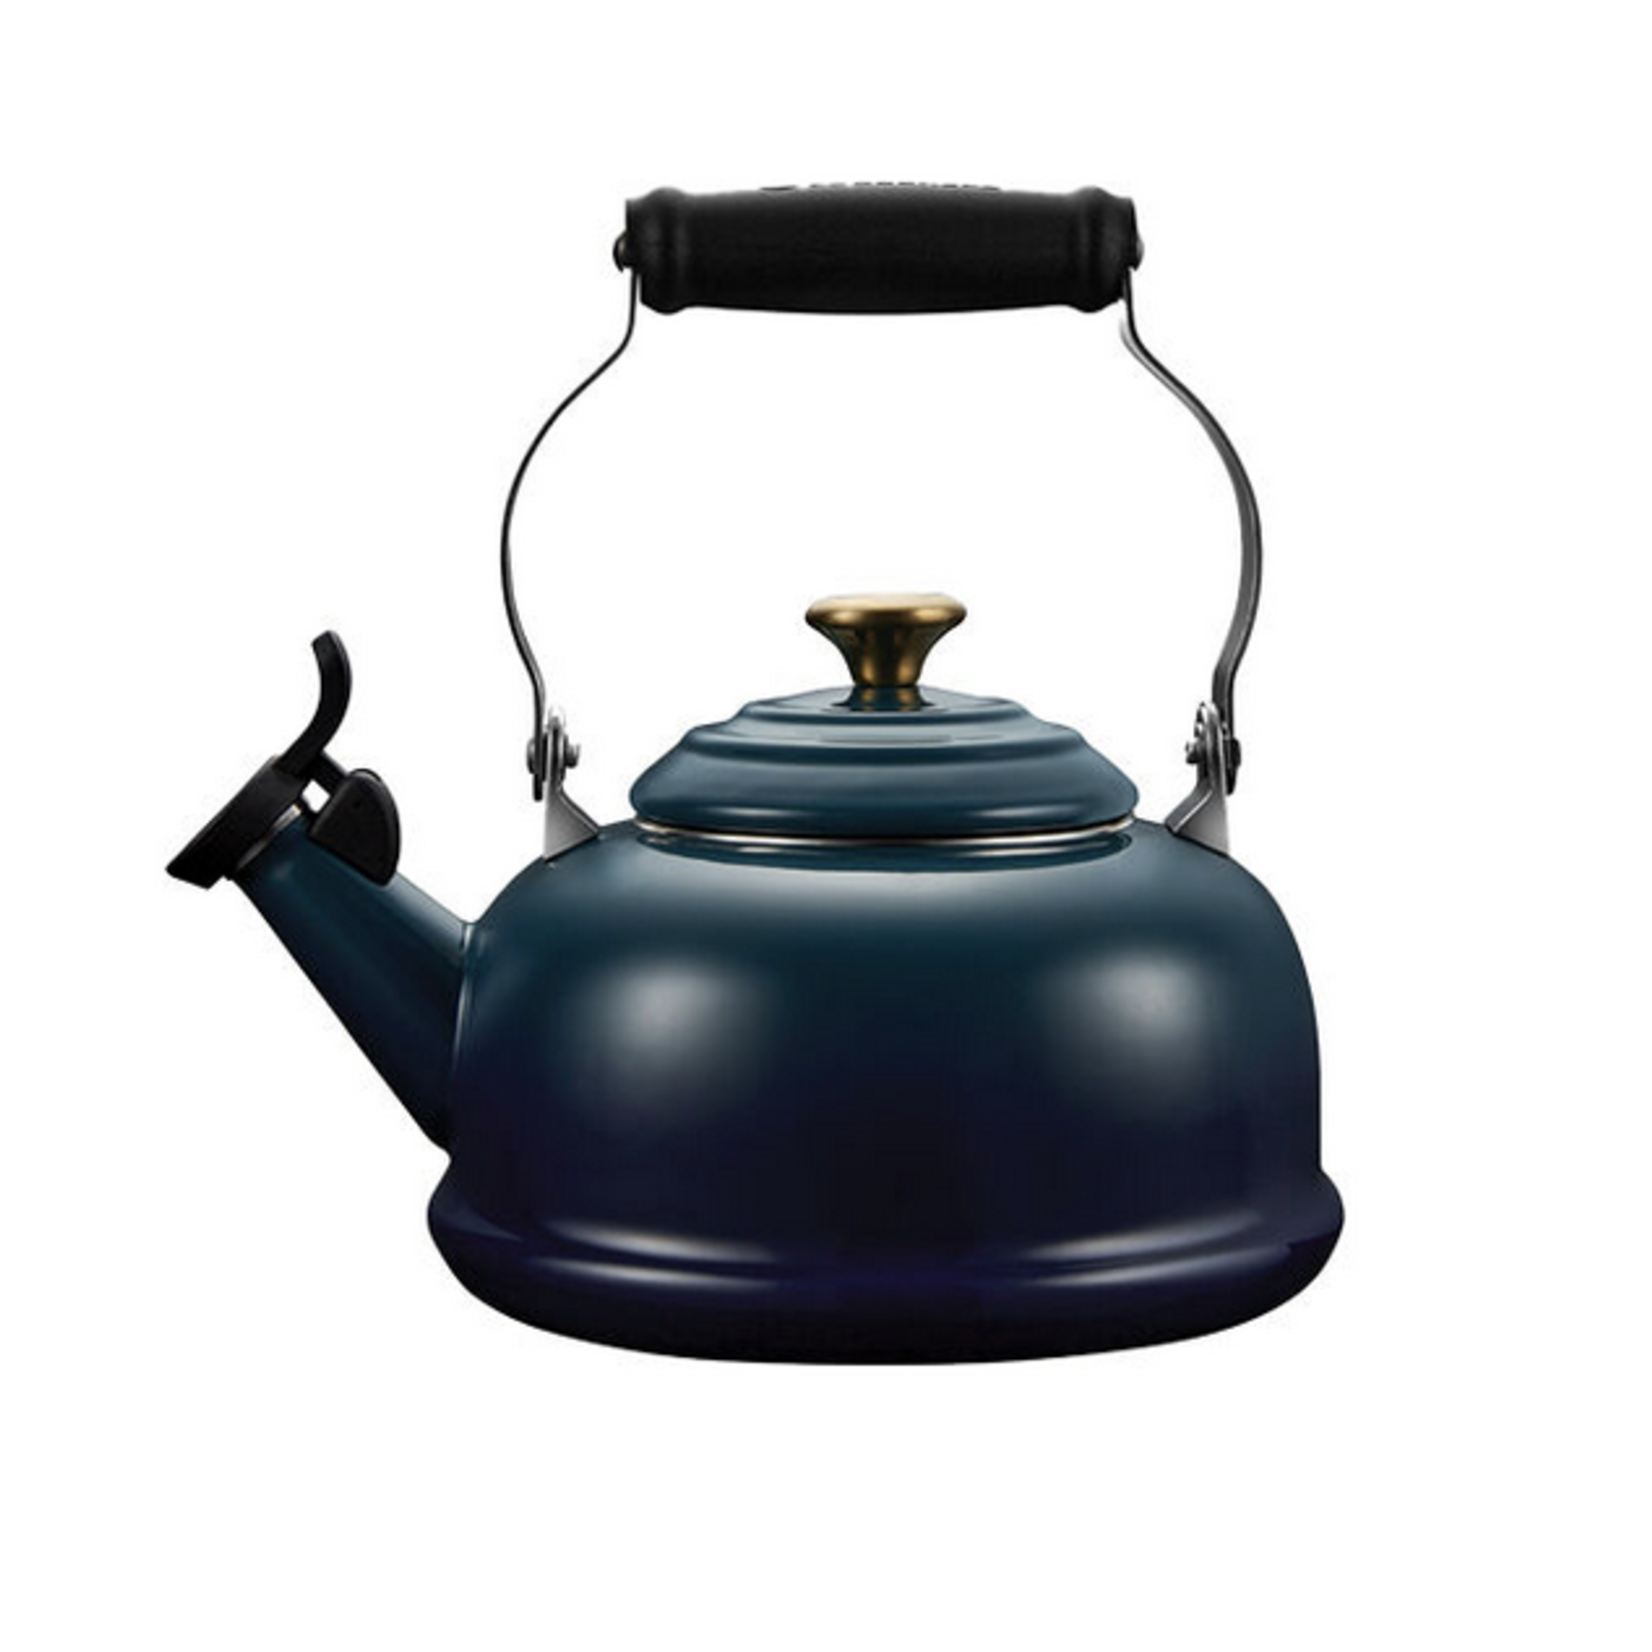 LE CREUSET LE CREUSET Classic Whistling Kettle - Agave